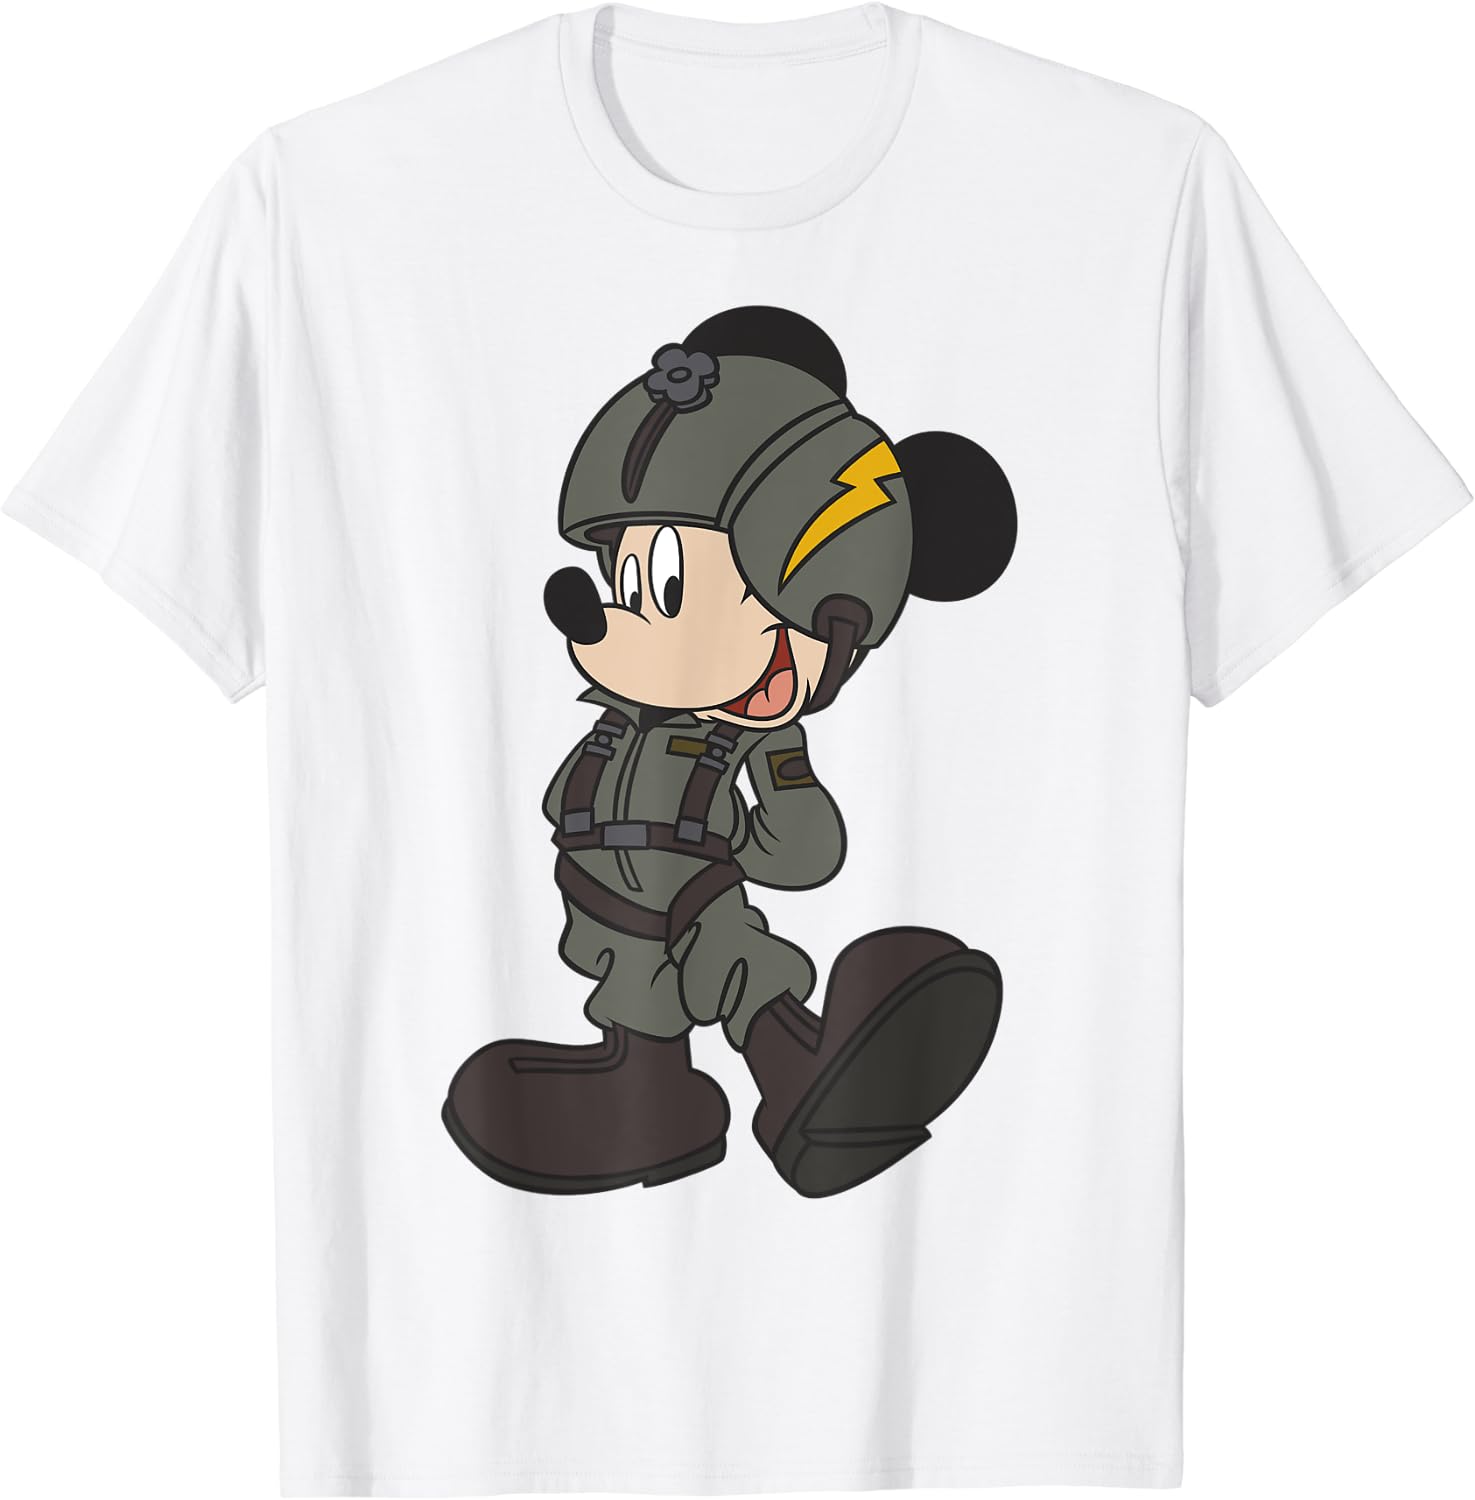 Disney Mickey Mouse Jet Pilot Outfit T-Shirt